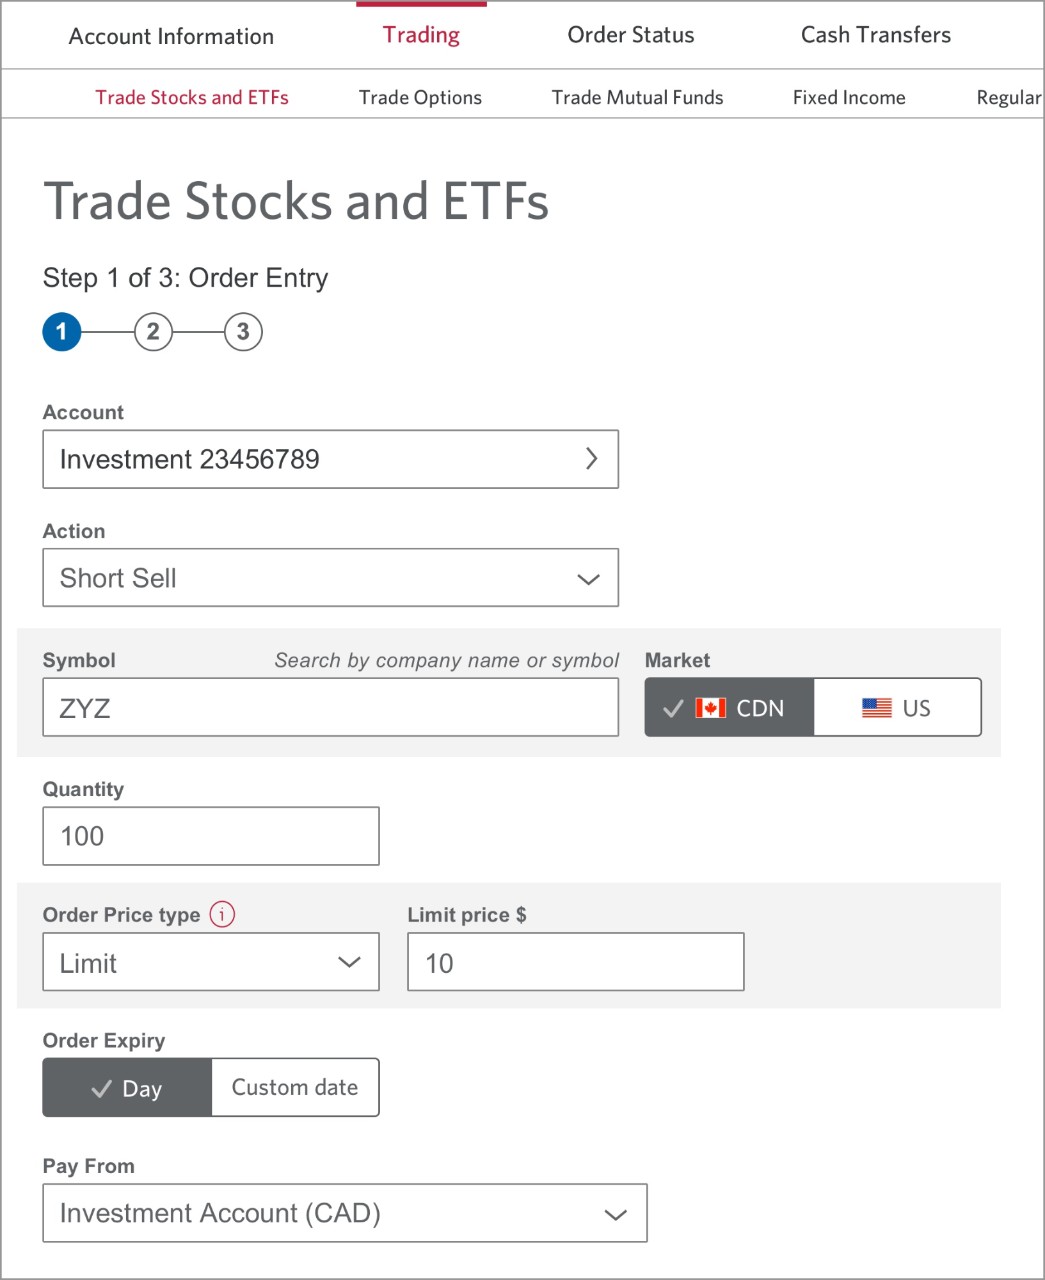 The Trade Stocks and ETFs form.